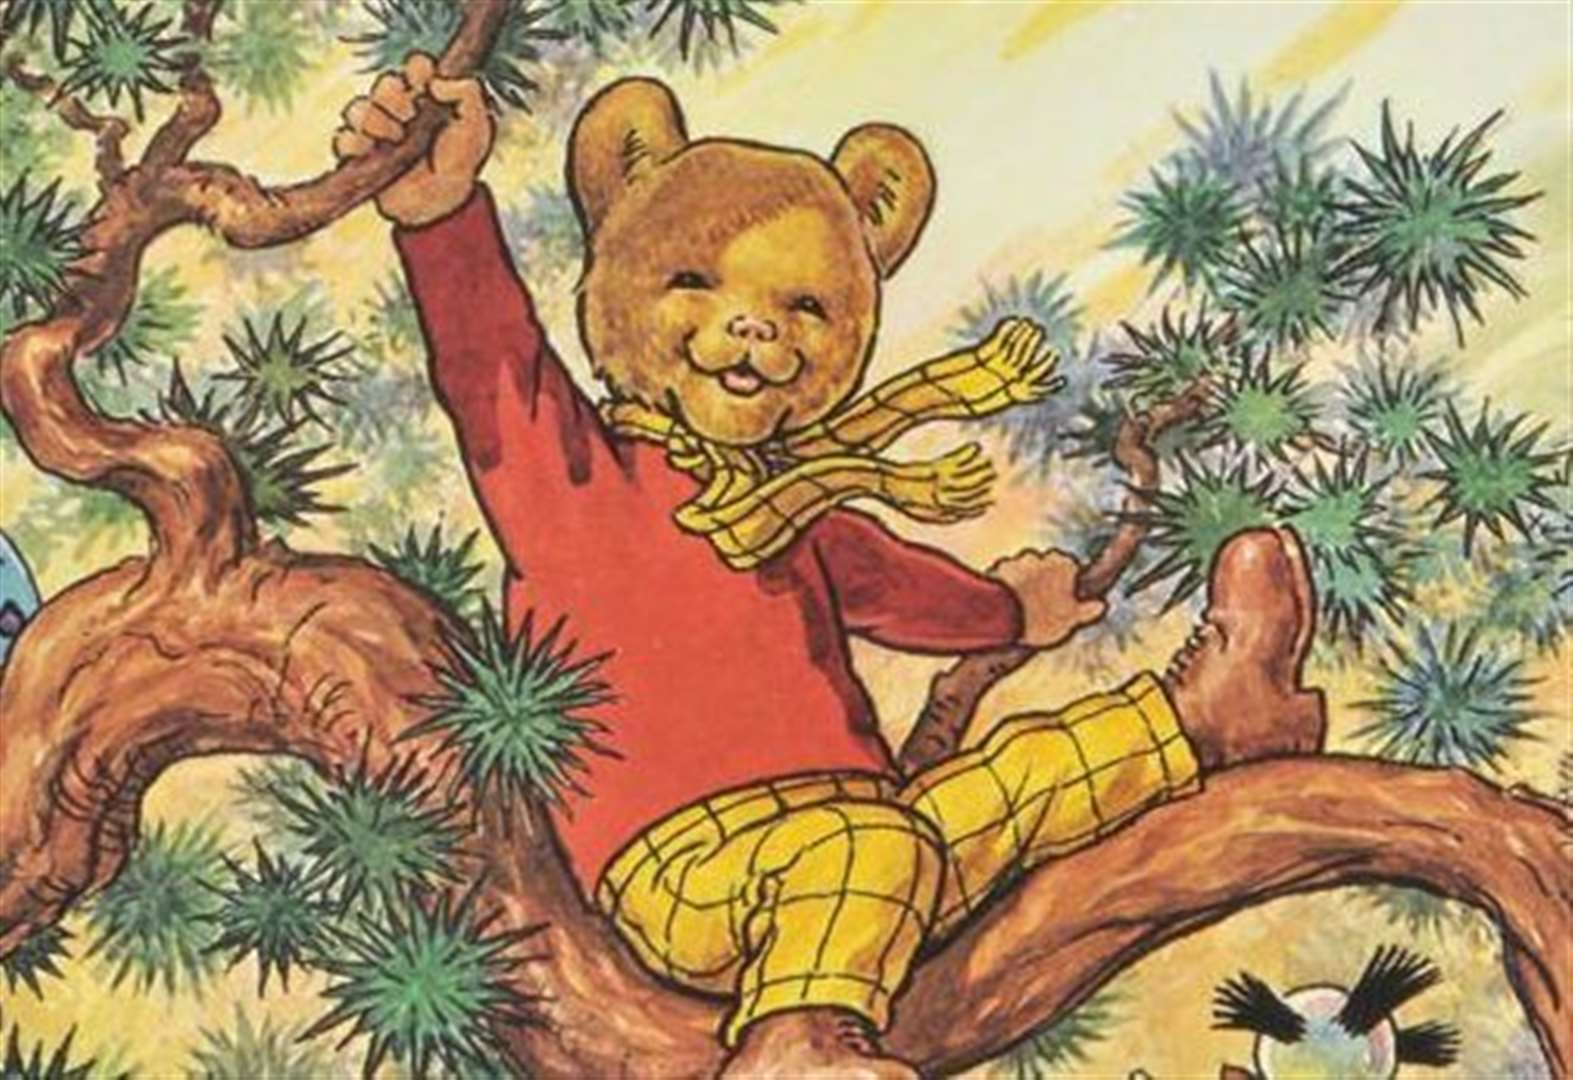 Rupert Bear 1920-2020: How Canterbury&#39;s Mary Tourtel created an iconic character 100 years on